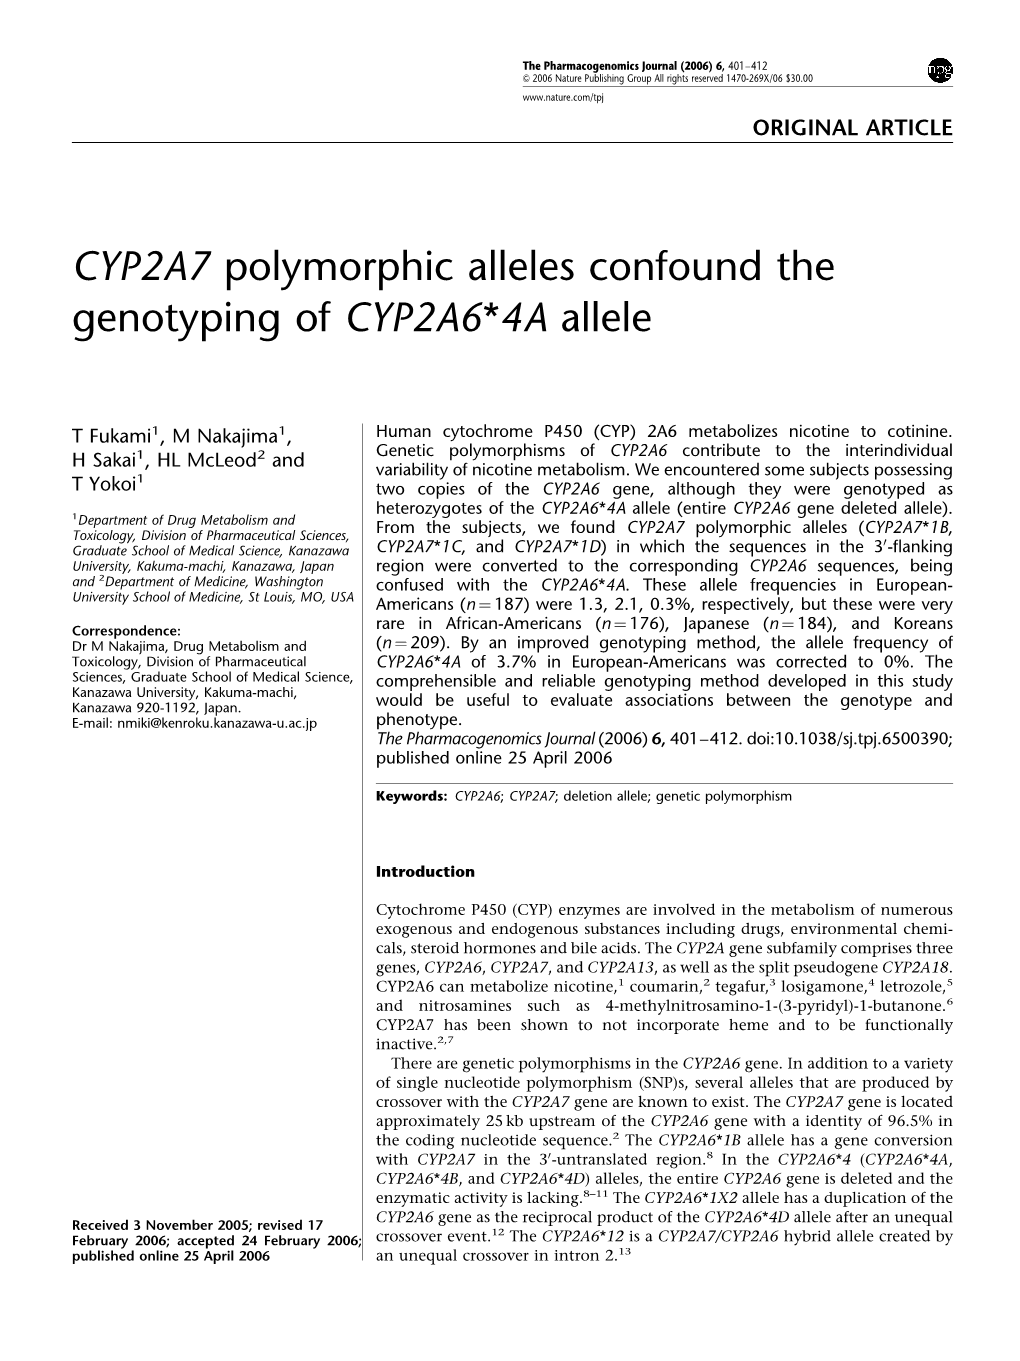 CYP2A7 Polymorphic Alleles Confound the Genotyping of CYP2A6*4A Allele